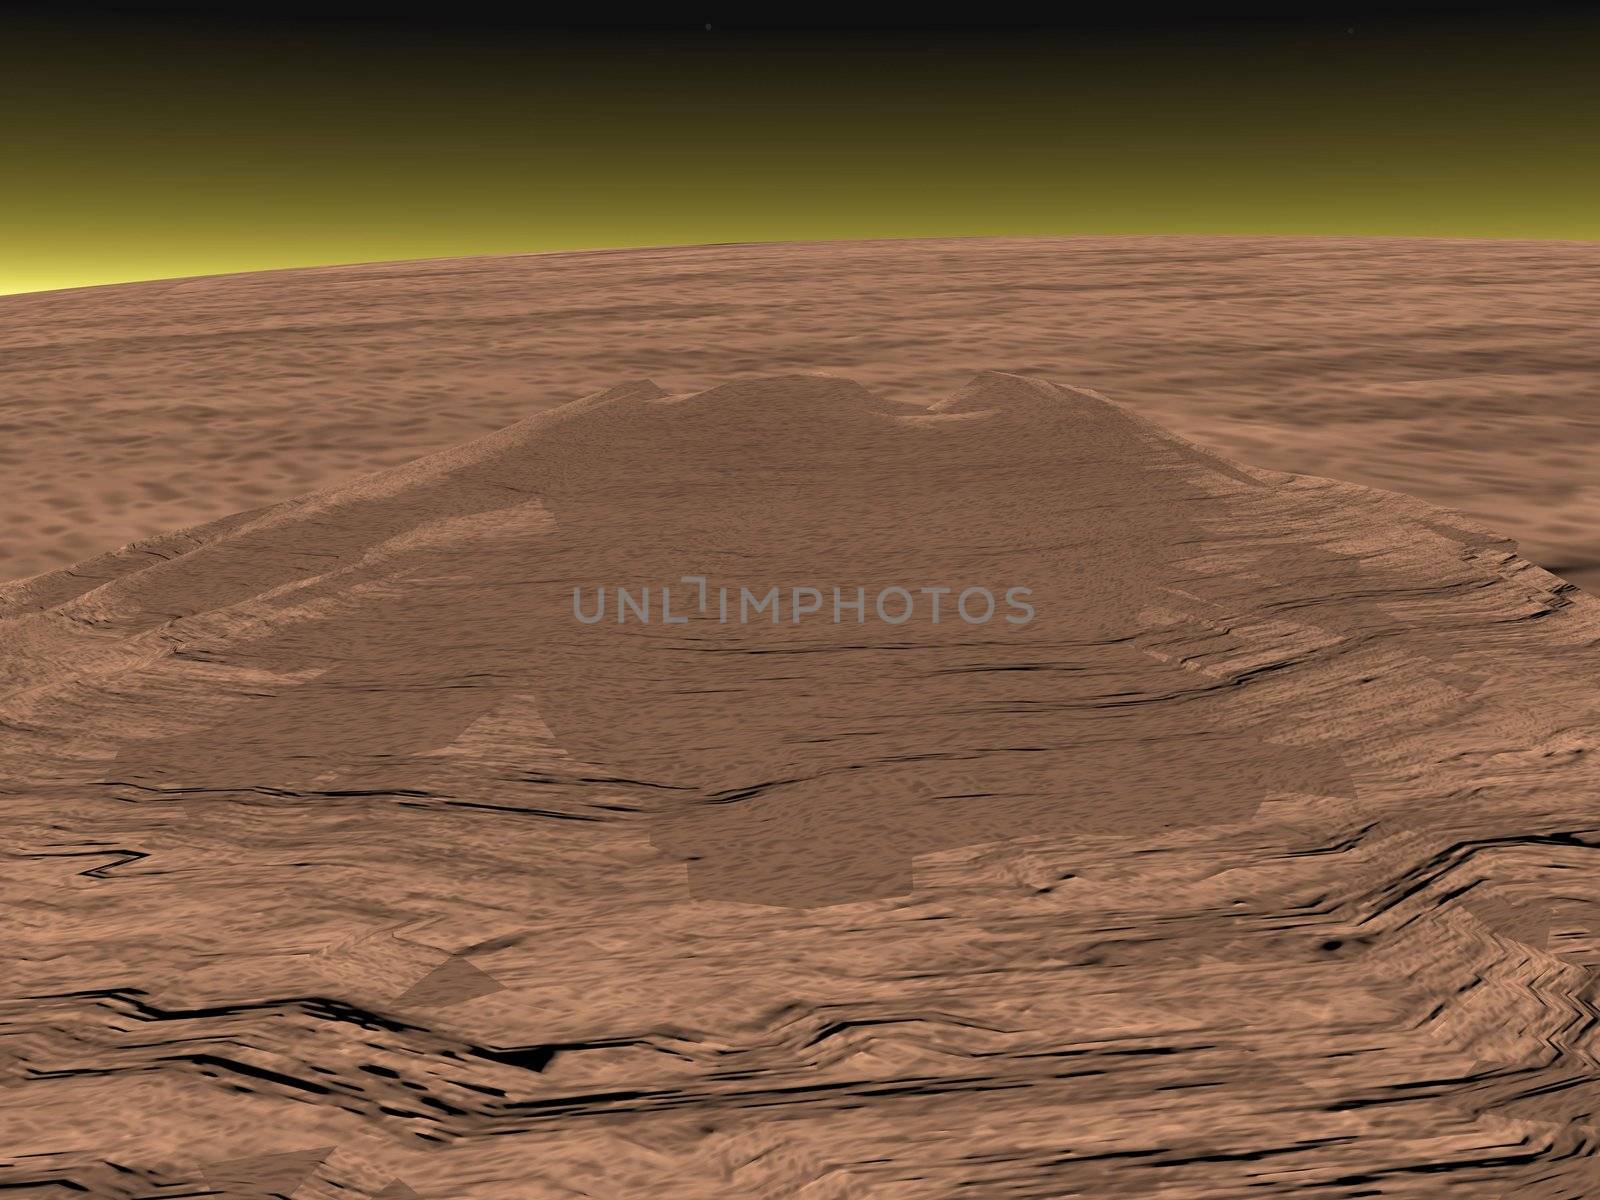 A representation of very high and big volcano Olympus Mons on Mars planet